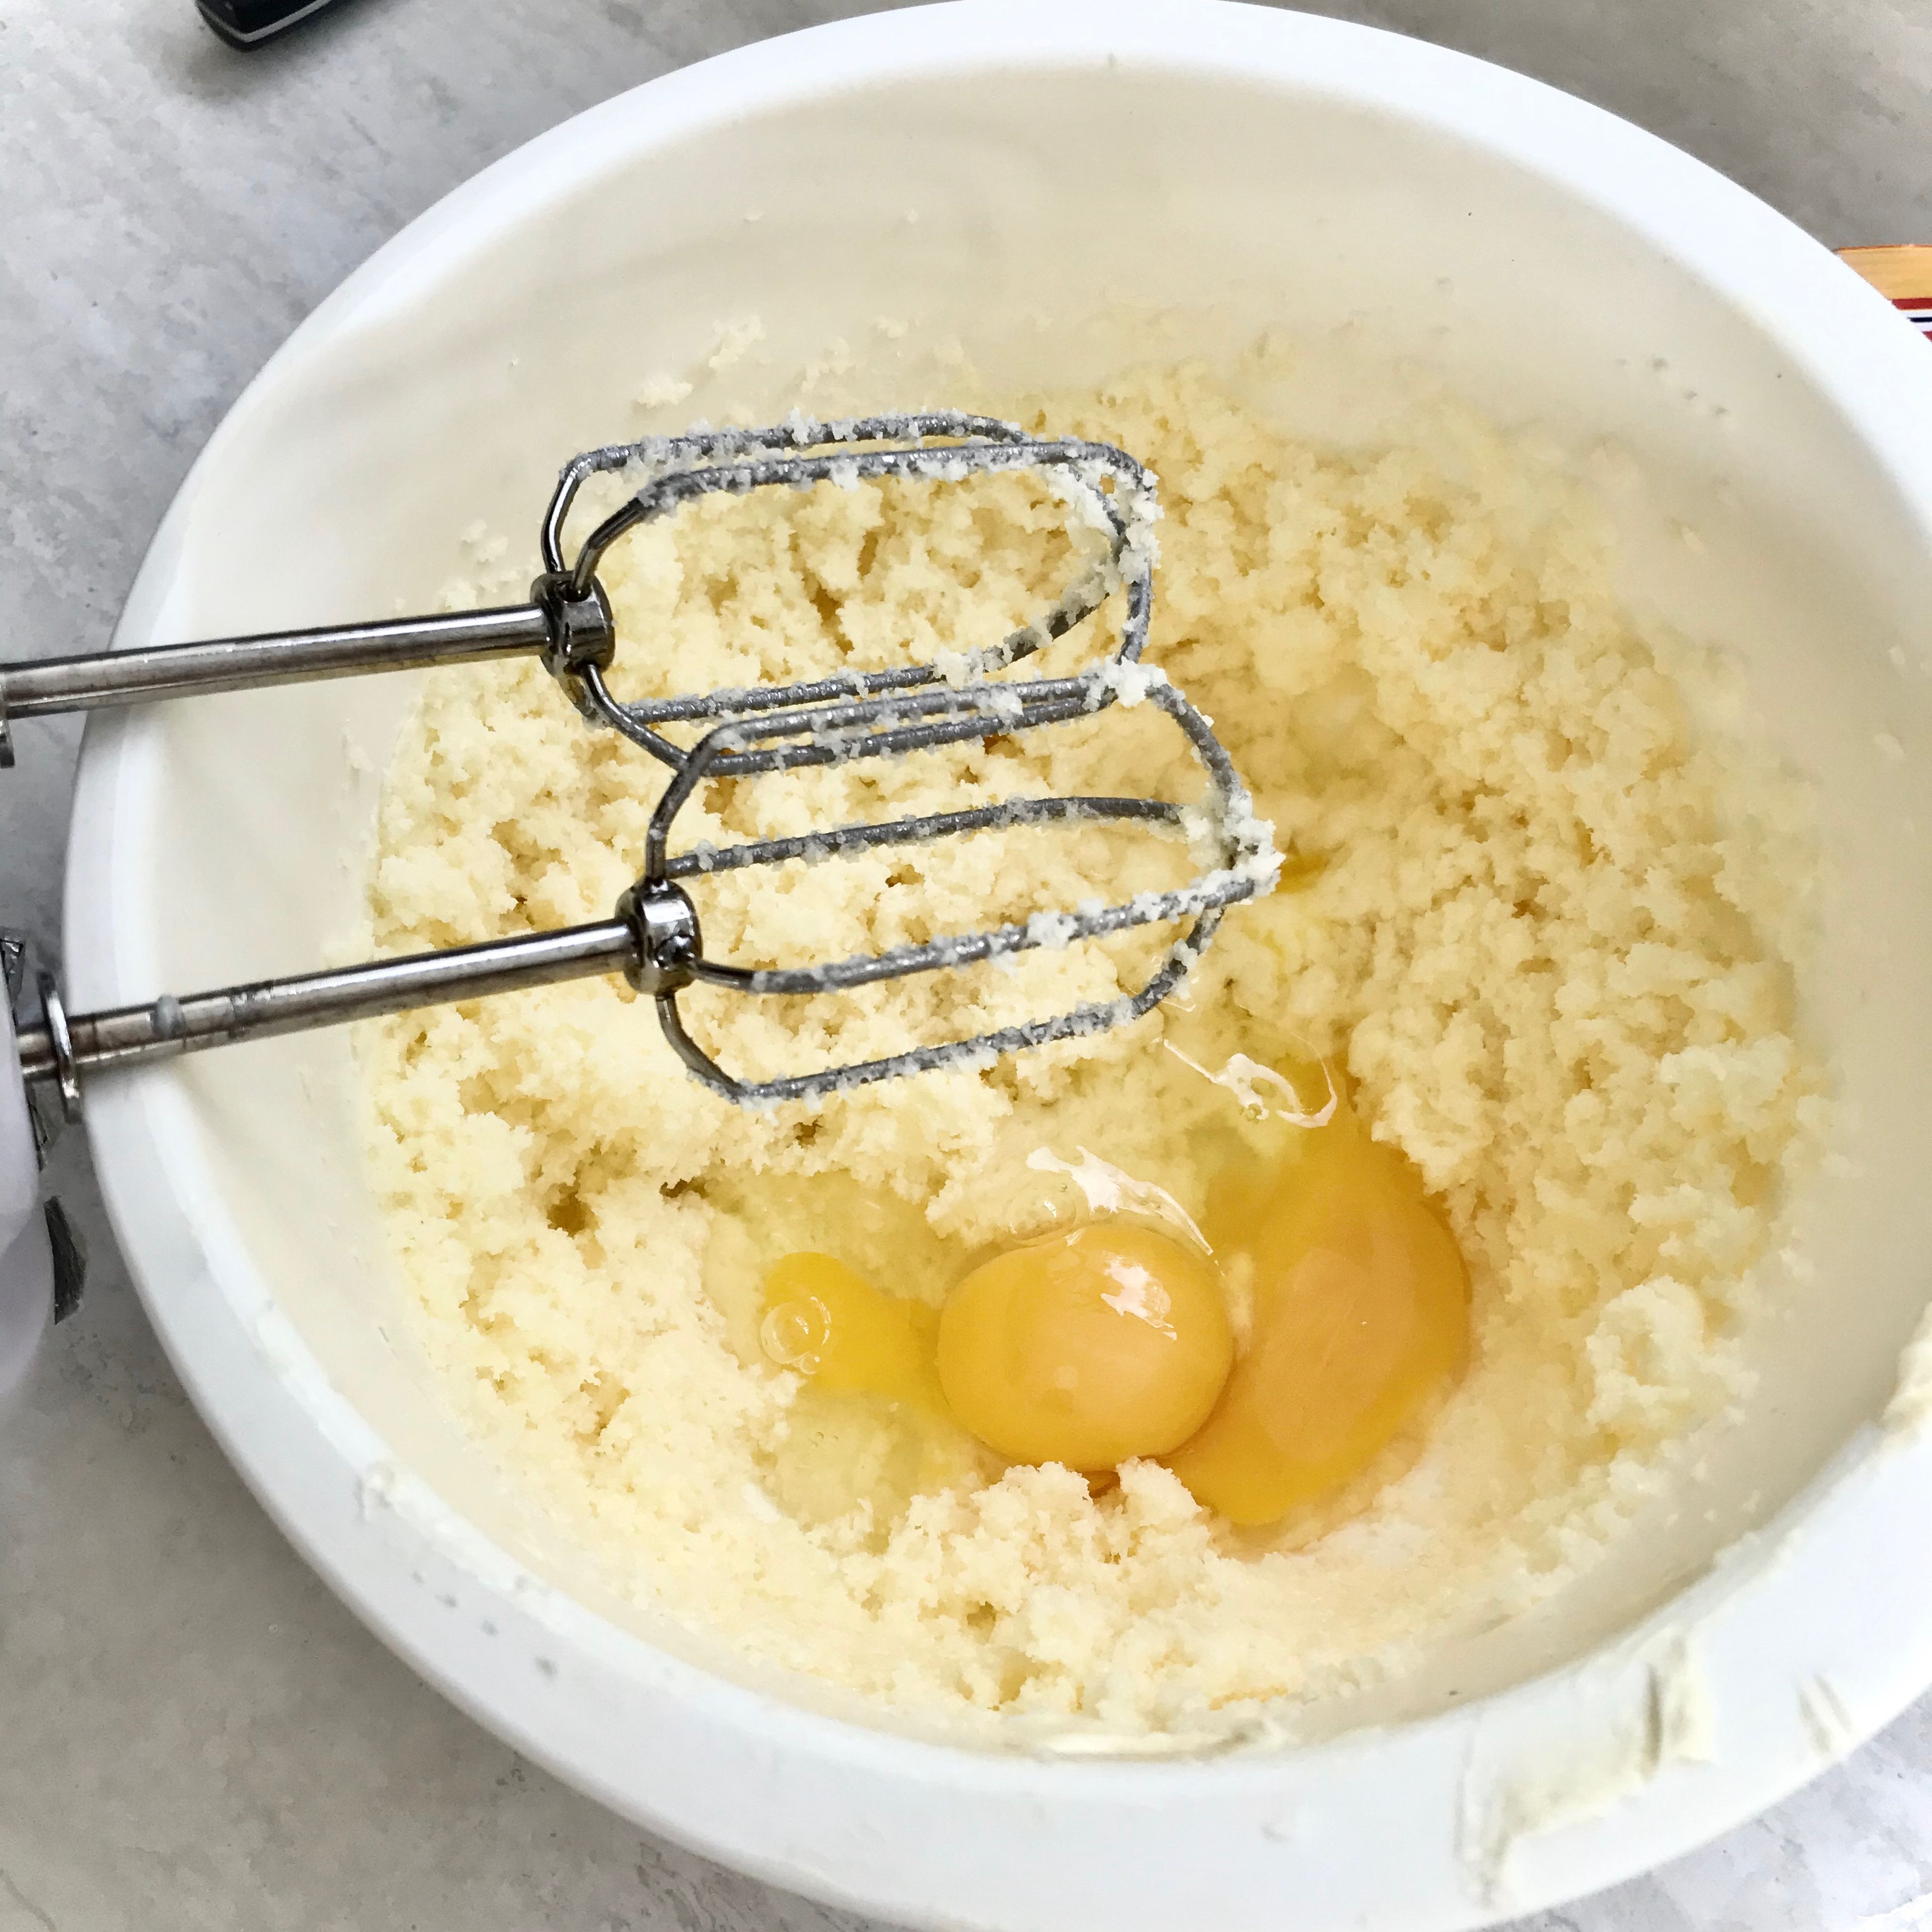 Add eggs and continue mixing